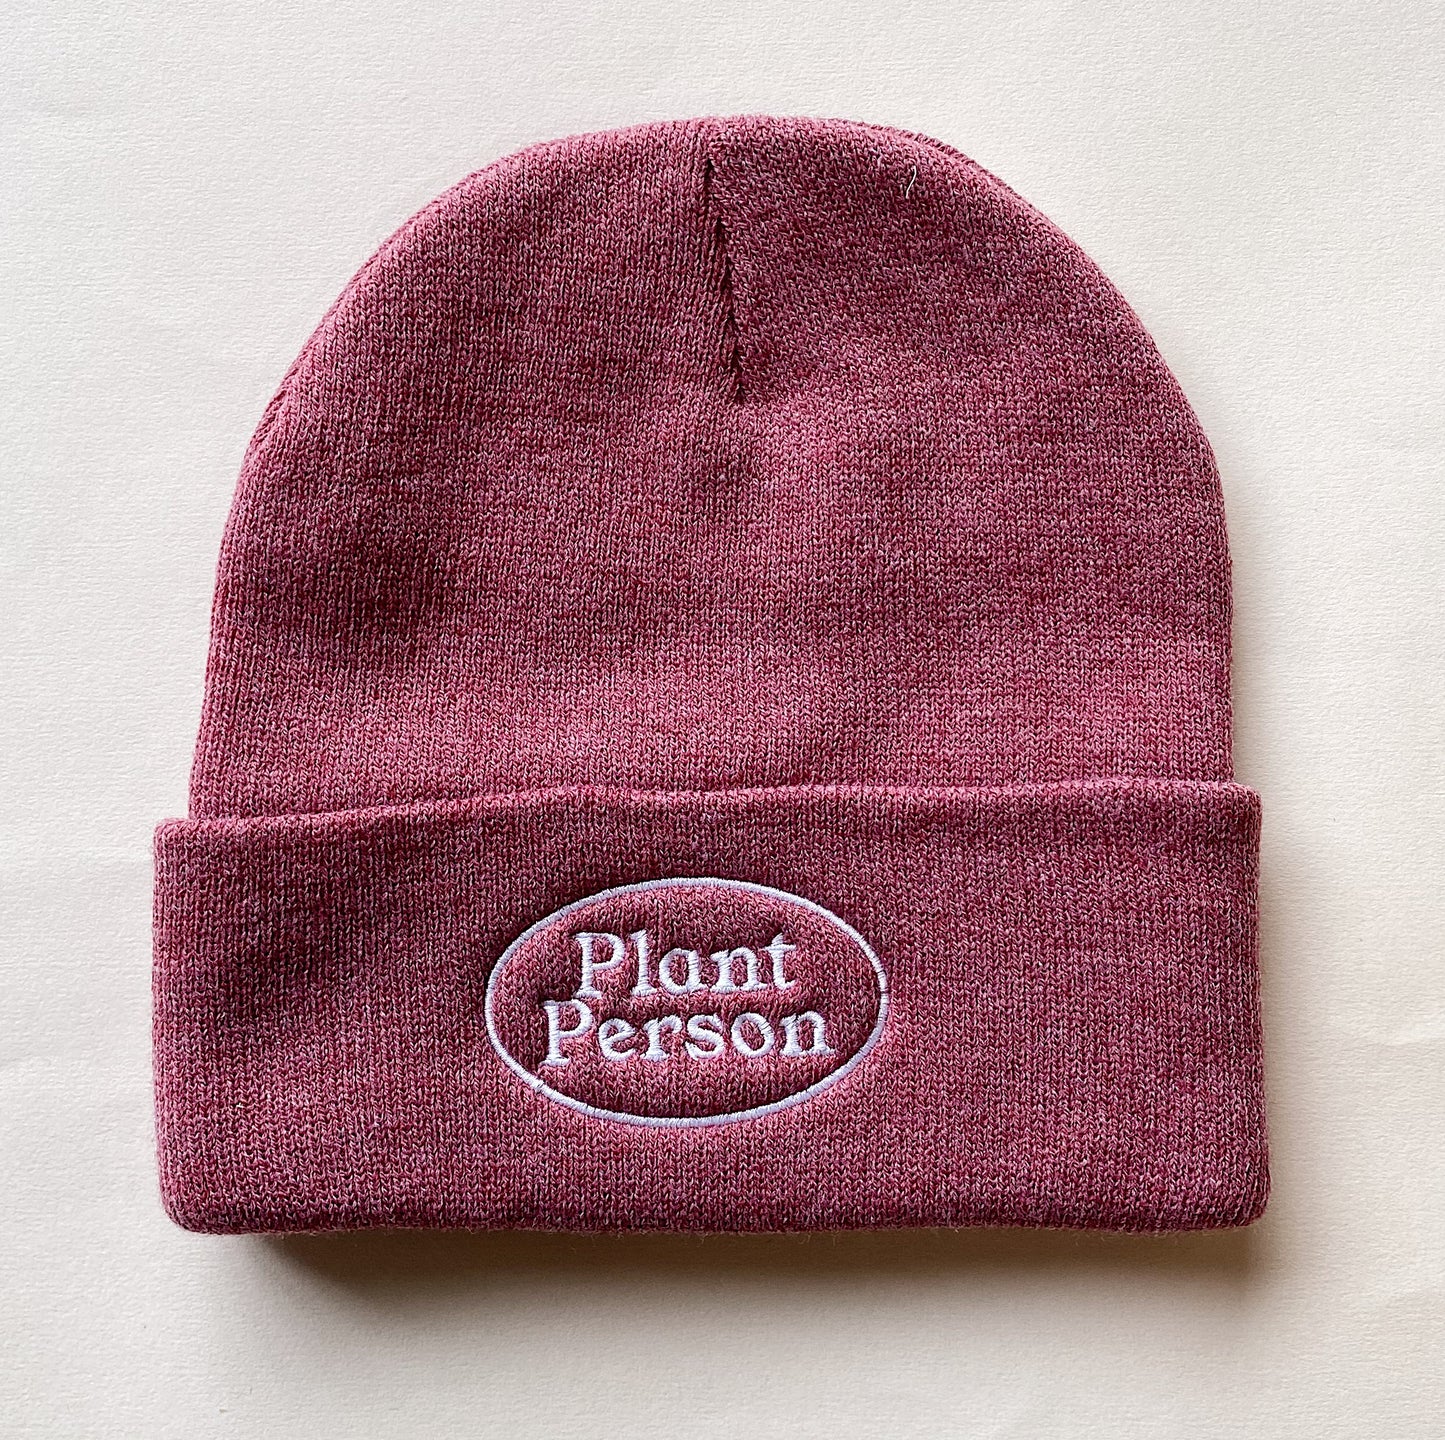 Plant Person Beanie - Kindred Spirits